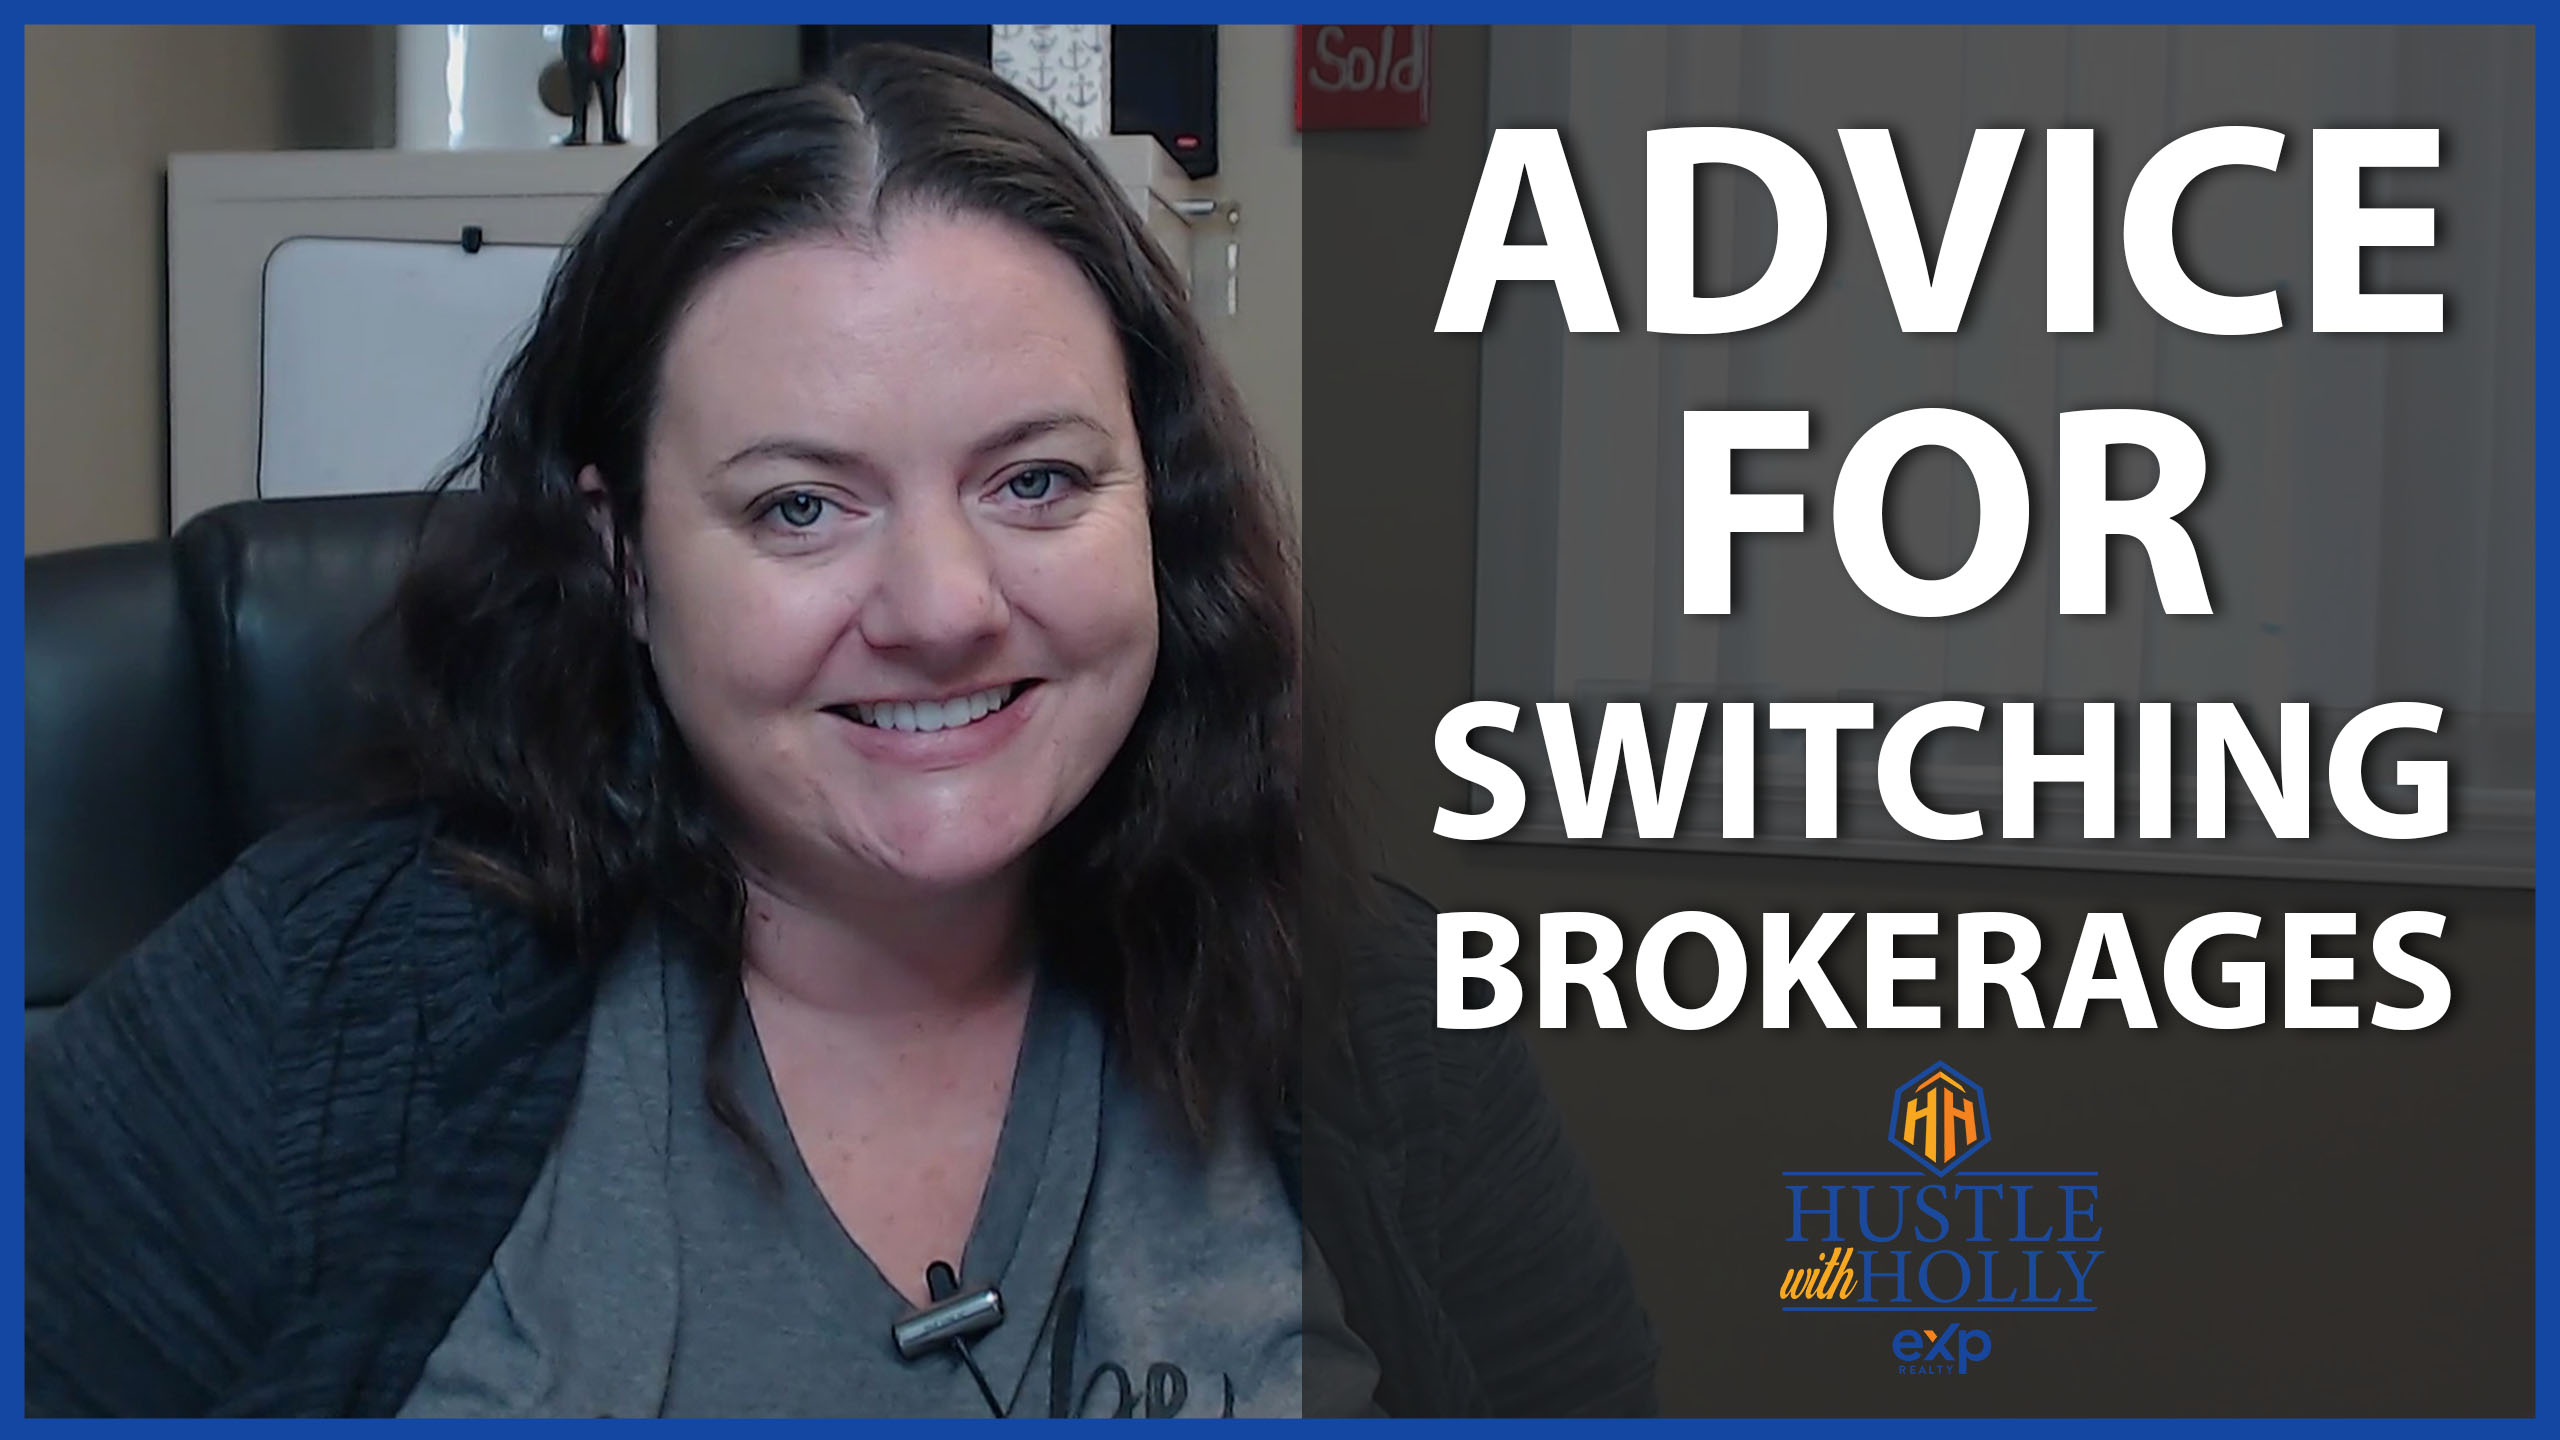 Q: When’s the Best Time to Switch Brokerages?